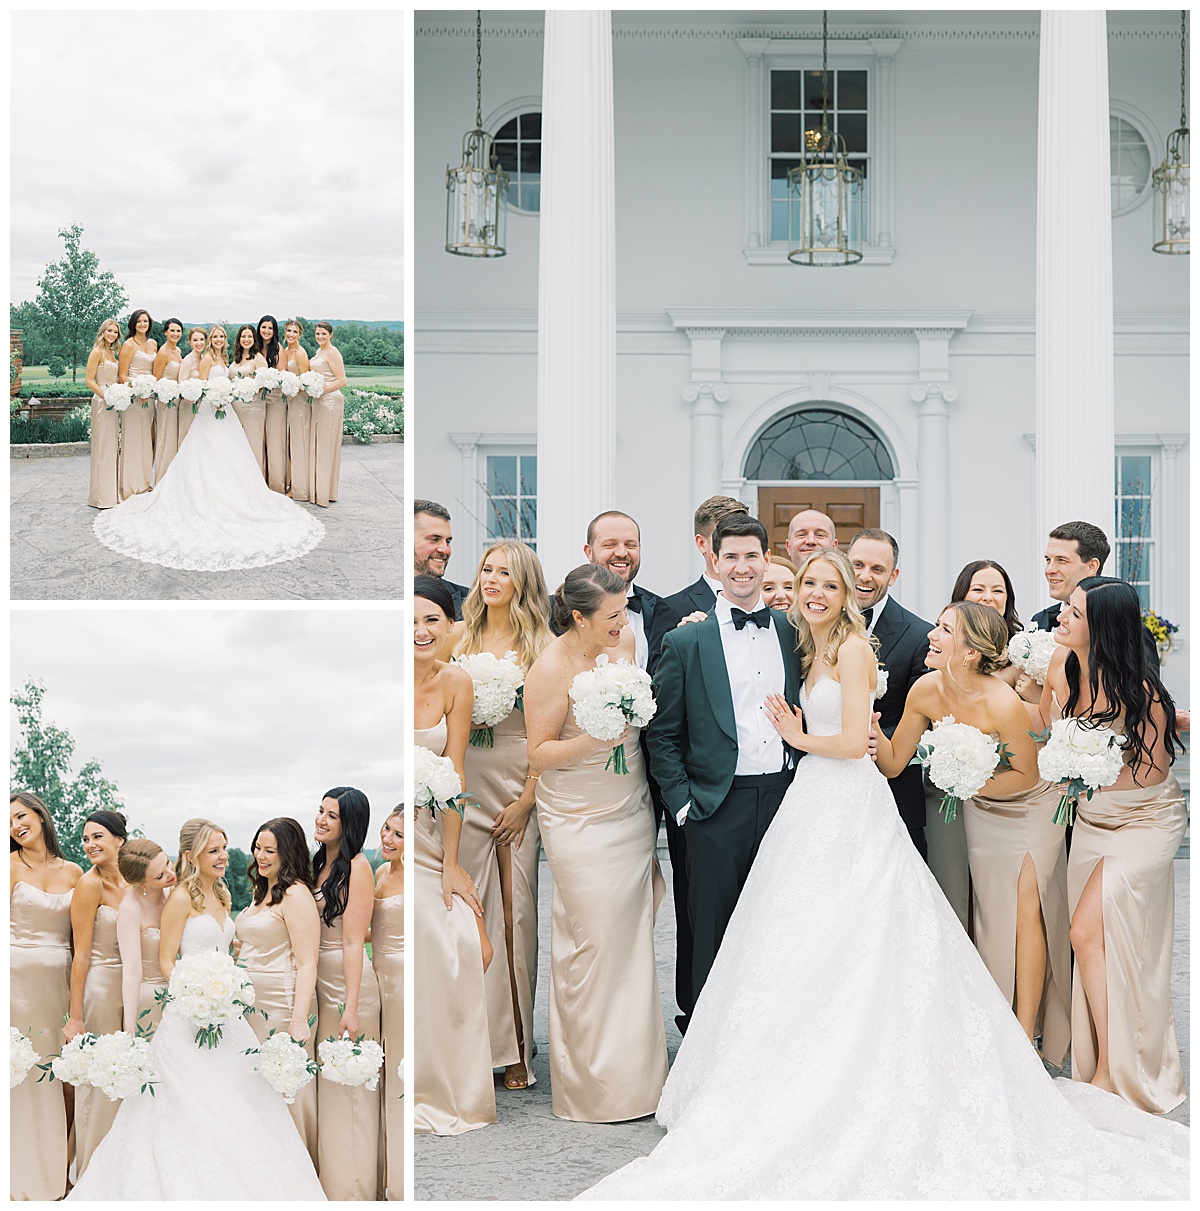 bridal party runs up on bride and groom for a cute candid moment